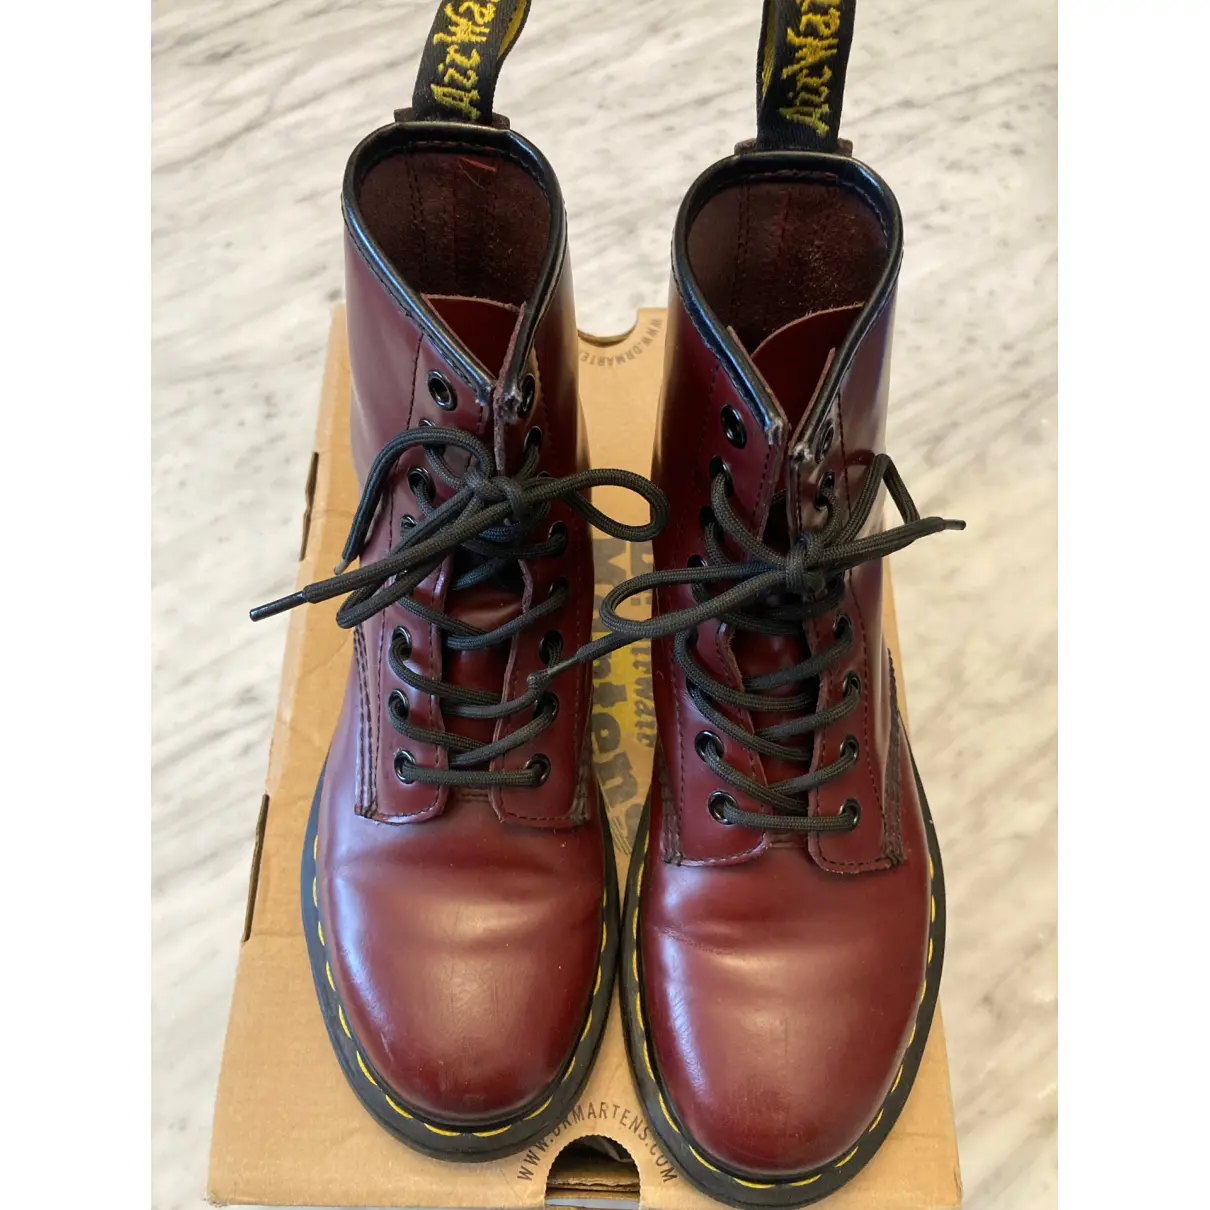 Buy Dr. Martens 1460 Pascal (8 eye) leather ankle boots online